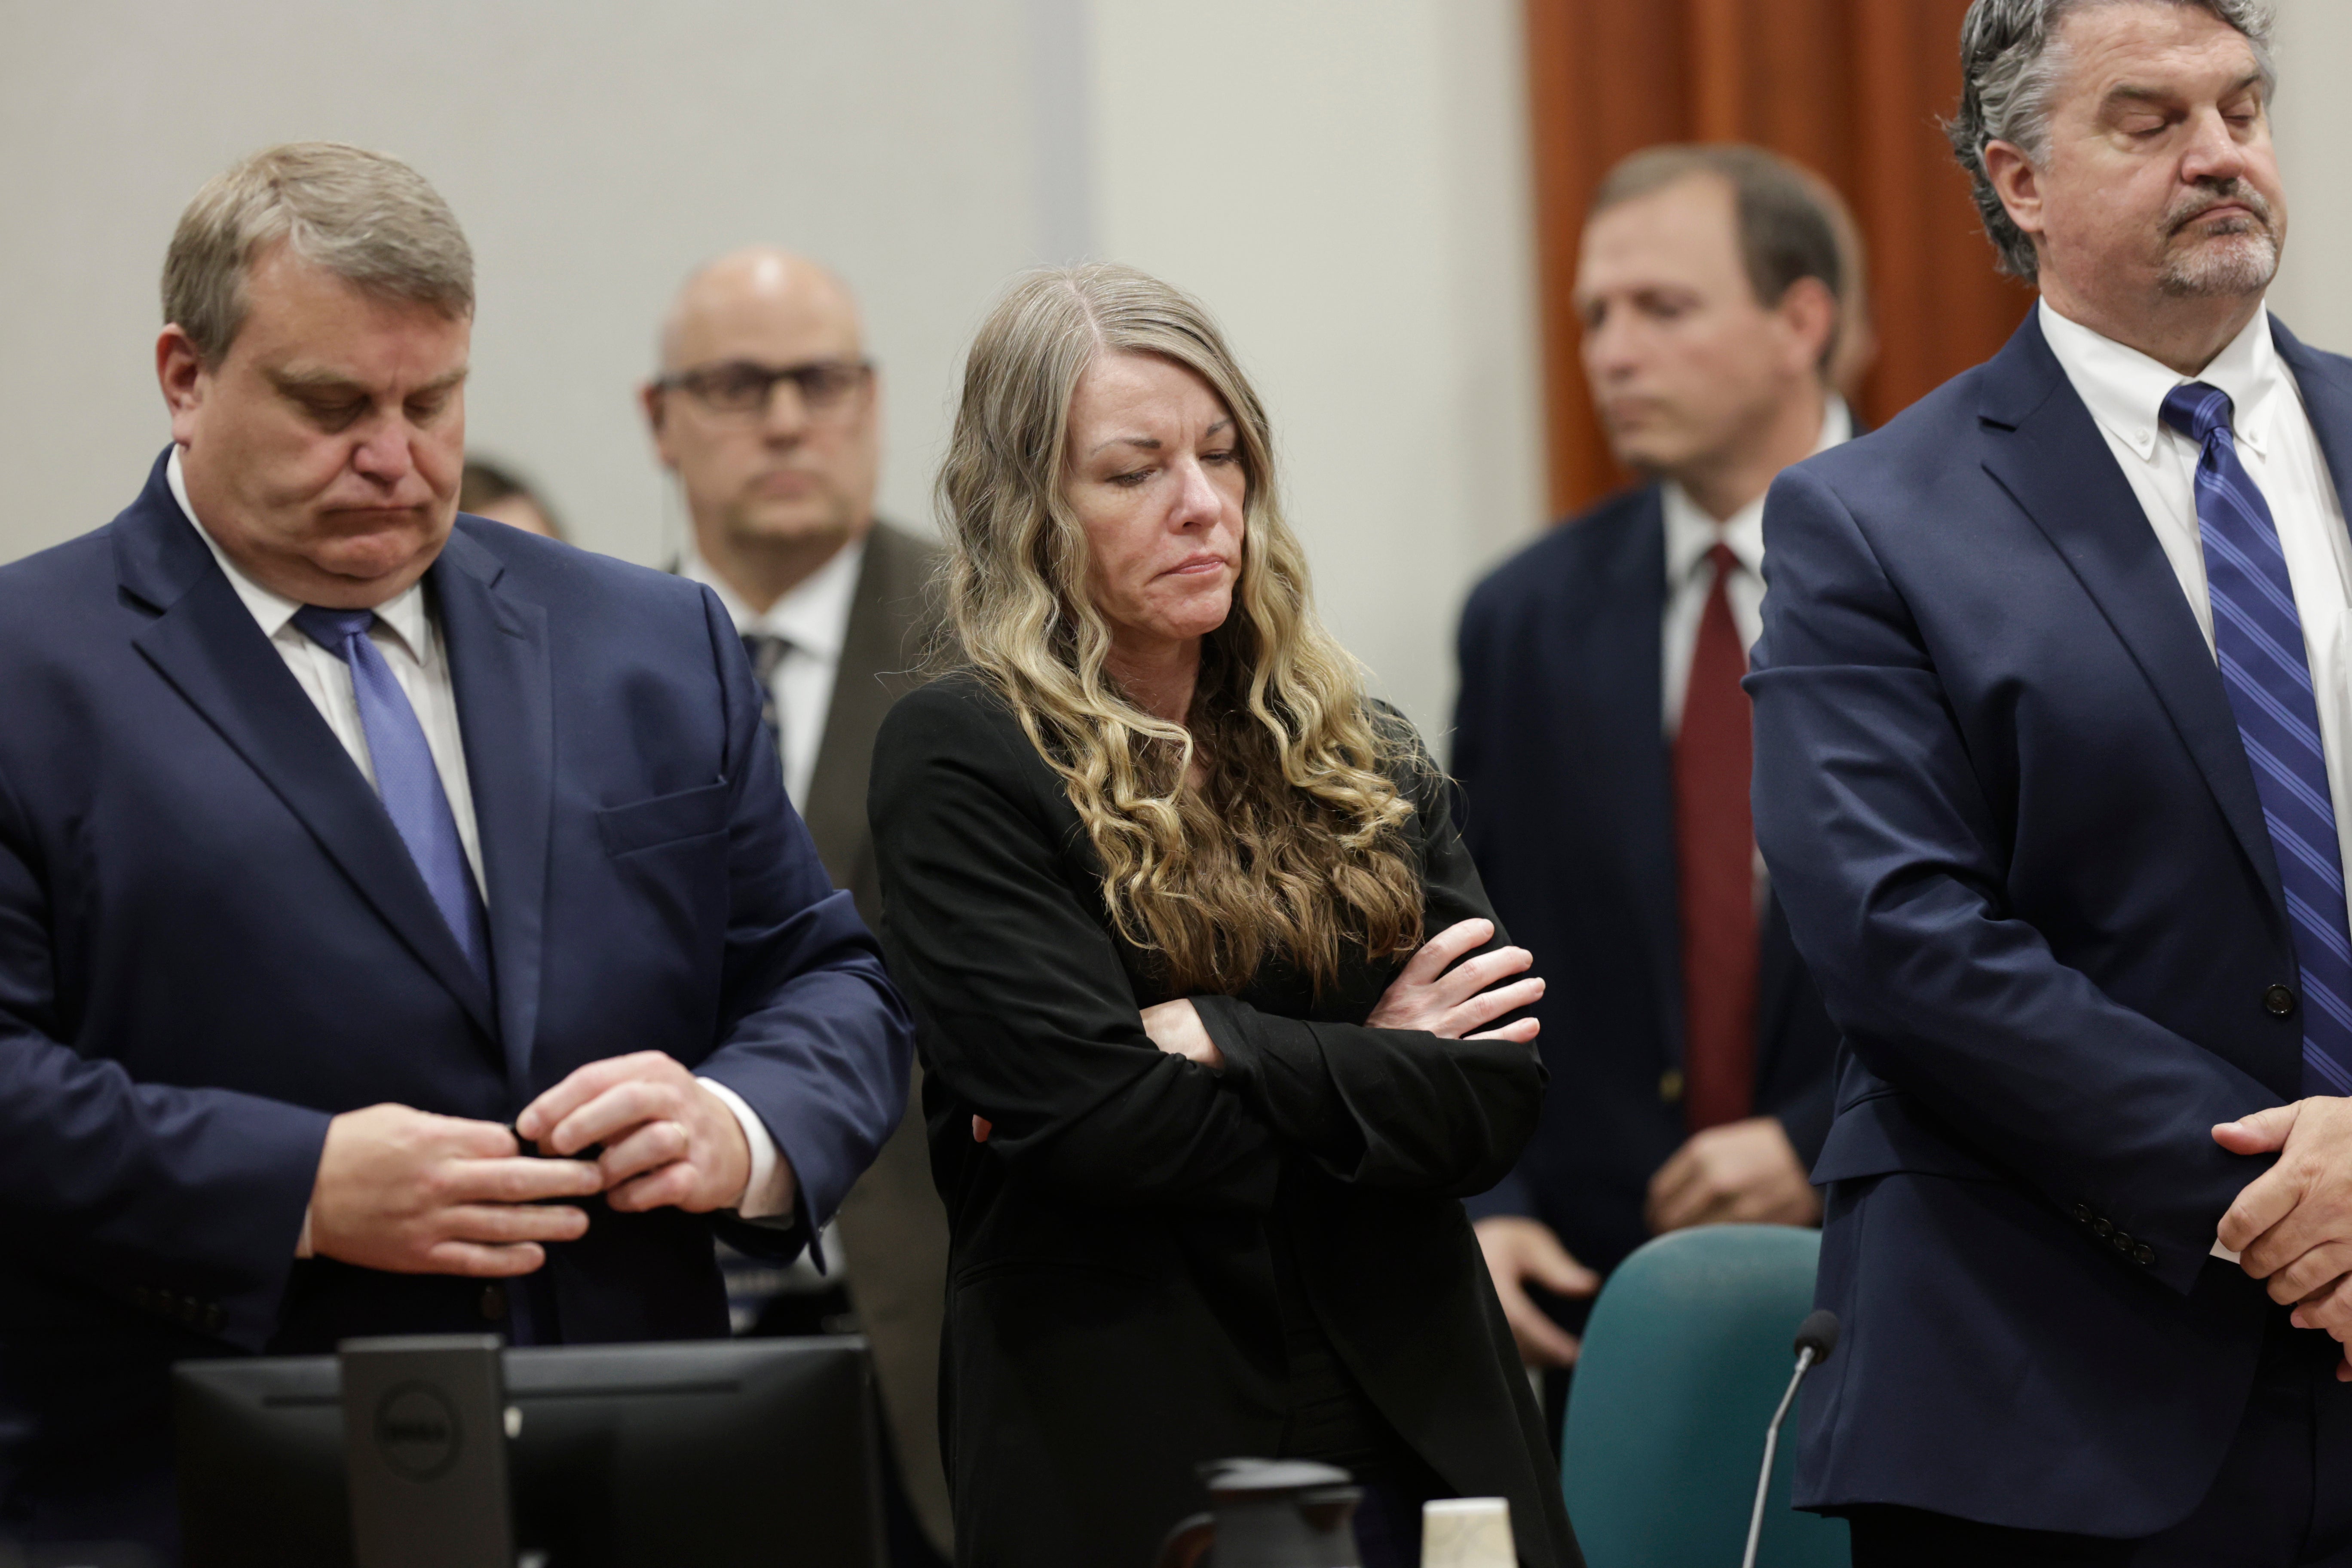 Last year, Lori Vallow was convicted in the three murders and sentenced to life in prison